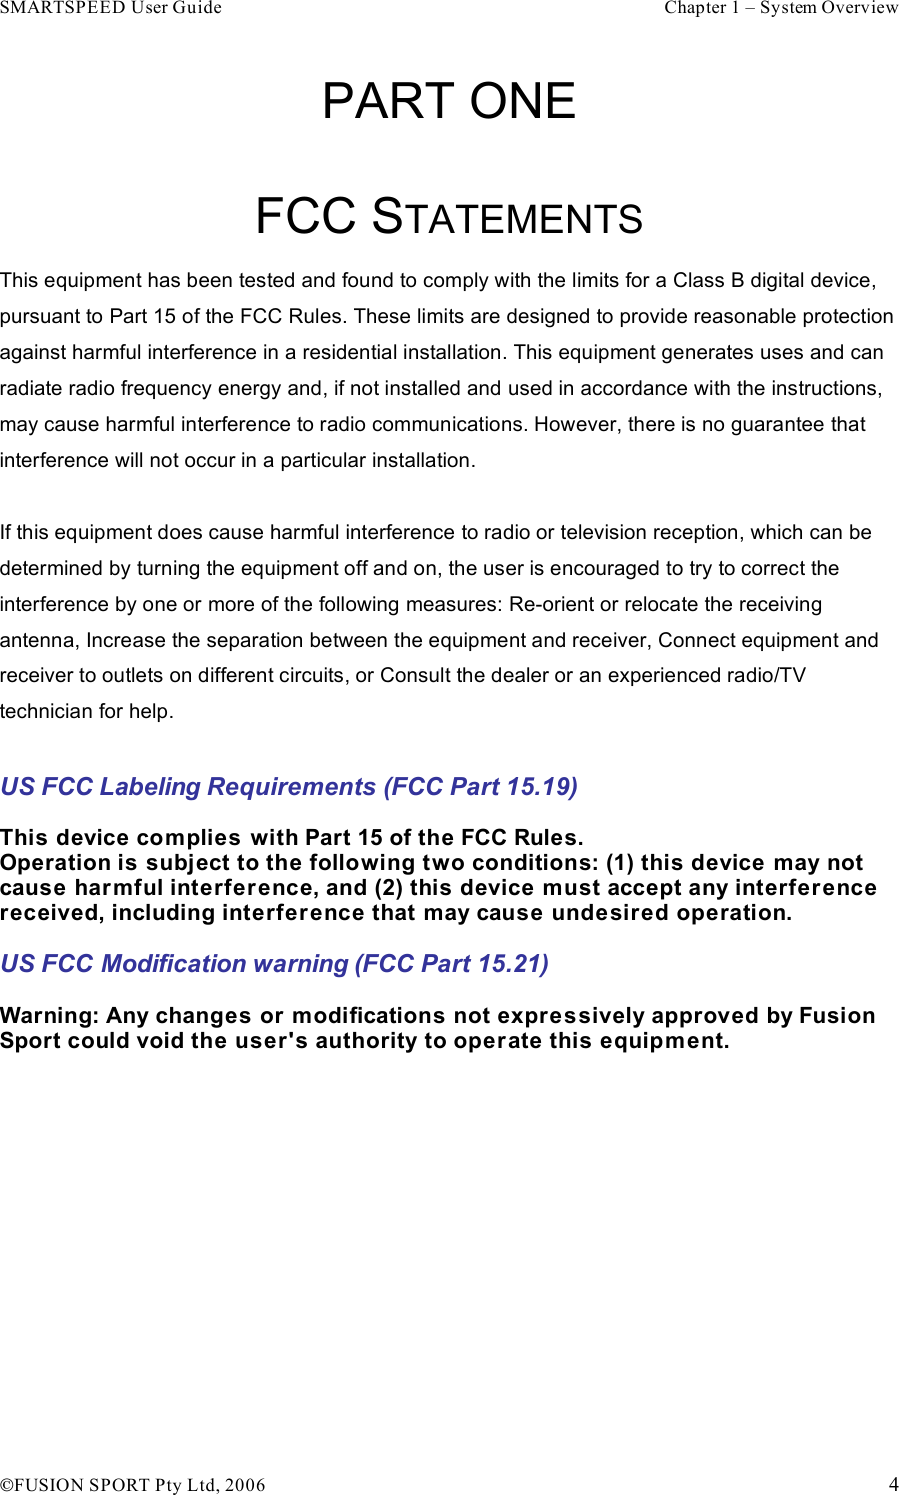 SMARTSPEED User Guide    Chapter 1 – System Overview !FUSION SPORT Pty Ltd, 2006    4 PART ONE  FCC STATEMENTS  This equipment has been tested and found to comply with the limits for a Class B digital device, pursuant to Part 15 of the FCC Rules. These limits are designed to provide reasonable protection against harmful interference in a residential installation. This equipment generates uses and can radiate radio frequency energy and, if not installed and used in accordance with the instructions, may cause harmful interference to radio communications. However, there is no guarantee that interference will not occur in a particular installation.  If this equipment does cause harmful interference to radio or television reception, which can be determined by turning the equipment off and on, the user is encouraged to try to correct the interference by one or more of the following measures: Re-orient or relocate the receiving antenna, Increase the separation between the equipment and receiver, Connect equipment and receiver to outlets on different circuits, or Consult the dealer or an experienced radio/TV technician for help.  US FCC Labeling Requirements (FCC Part 15.19)  This device complies with Part 15 of the FCC Rules. Operation is subject to the following two conditions: (1) this device may not cause harmful interfer ence, and (2) this device must accept any interference received, including interference that may cause undesired operation.  US FCC Modification warning (FCC Part 15.21)  Warning: Any changes or modifications not expressively approved by Fusion Sport could void the user&apos;s authority to operate this equipment.     